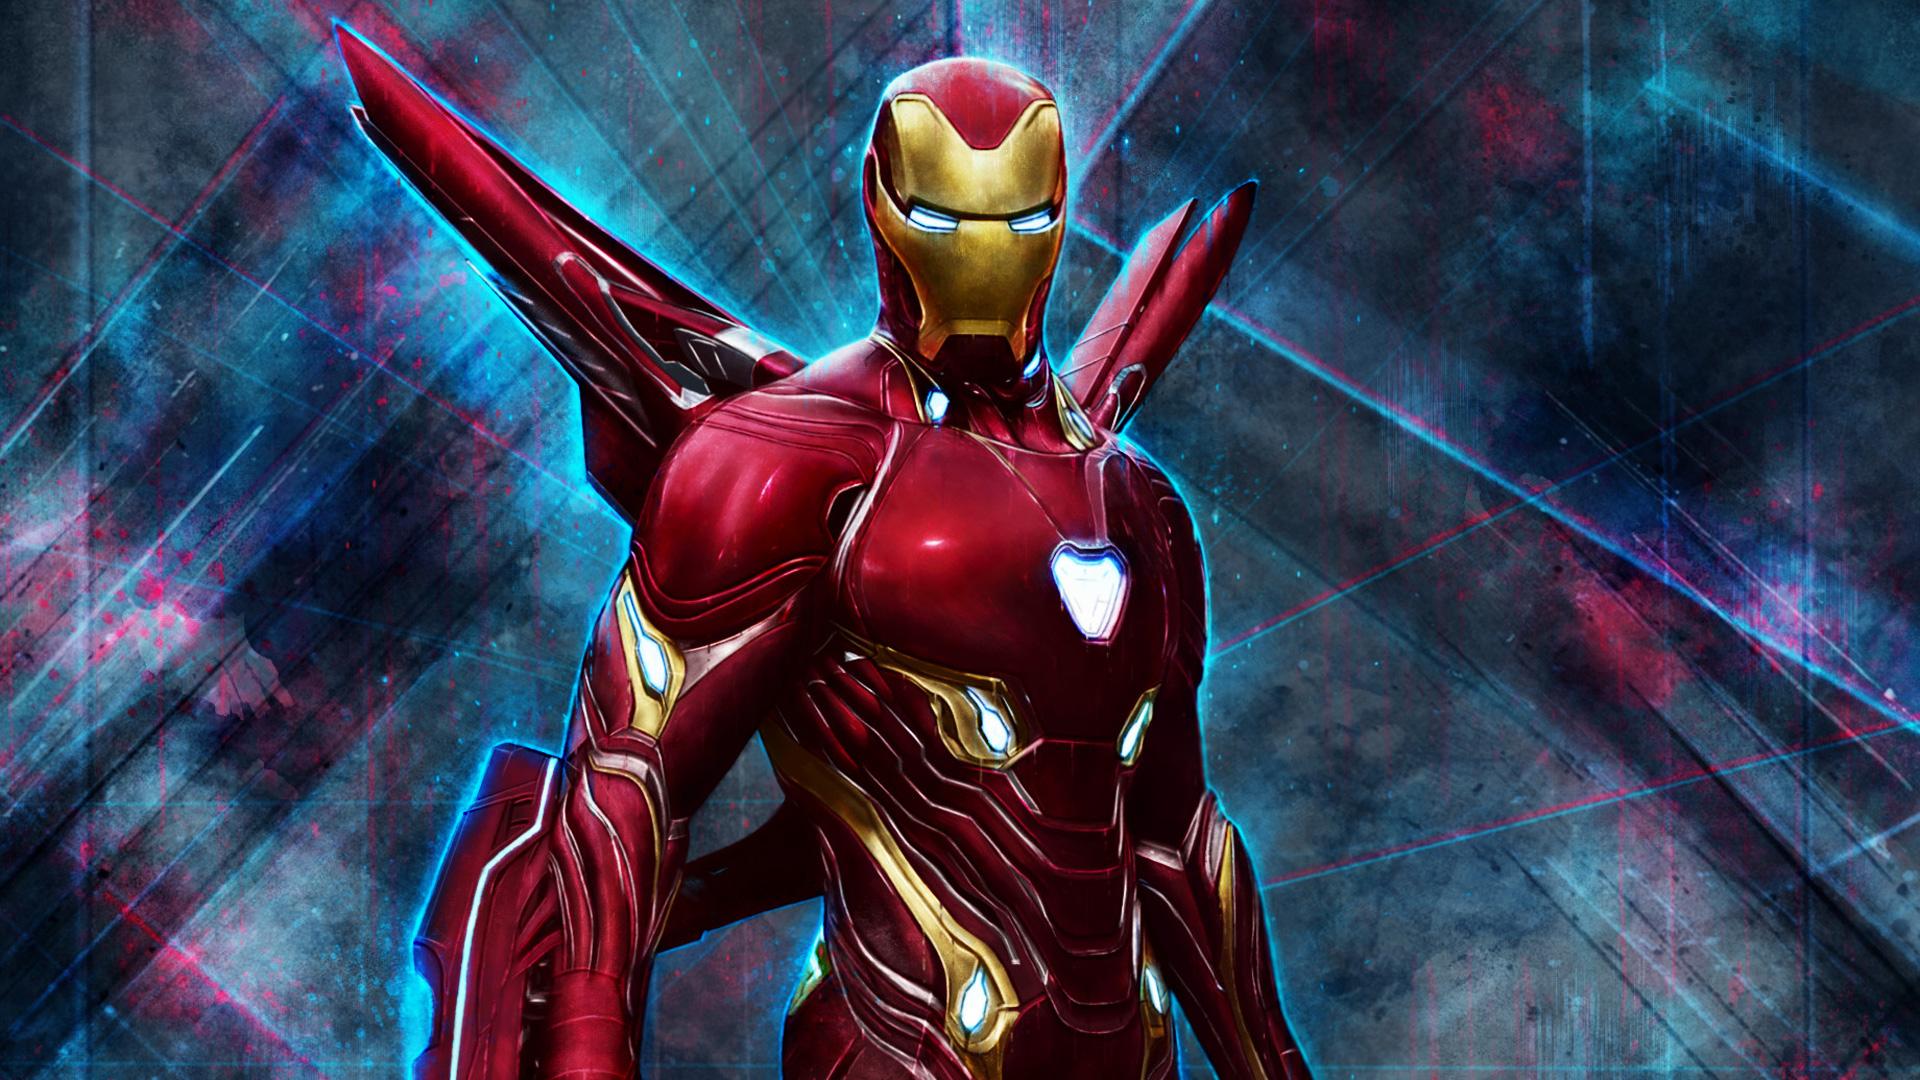 1920 x 1080 · jpeg - Iron Man Wallpaper with Mark L Armor Suit - HD Wallpapers | Wallpapers ...